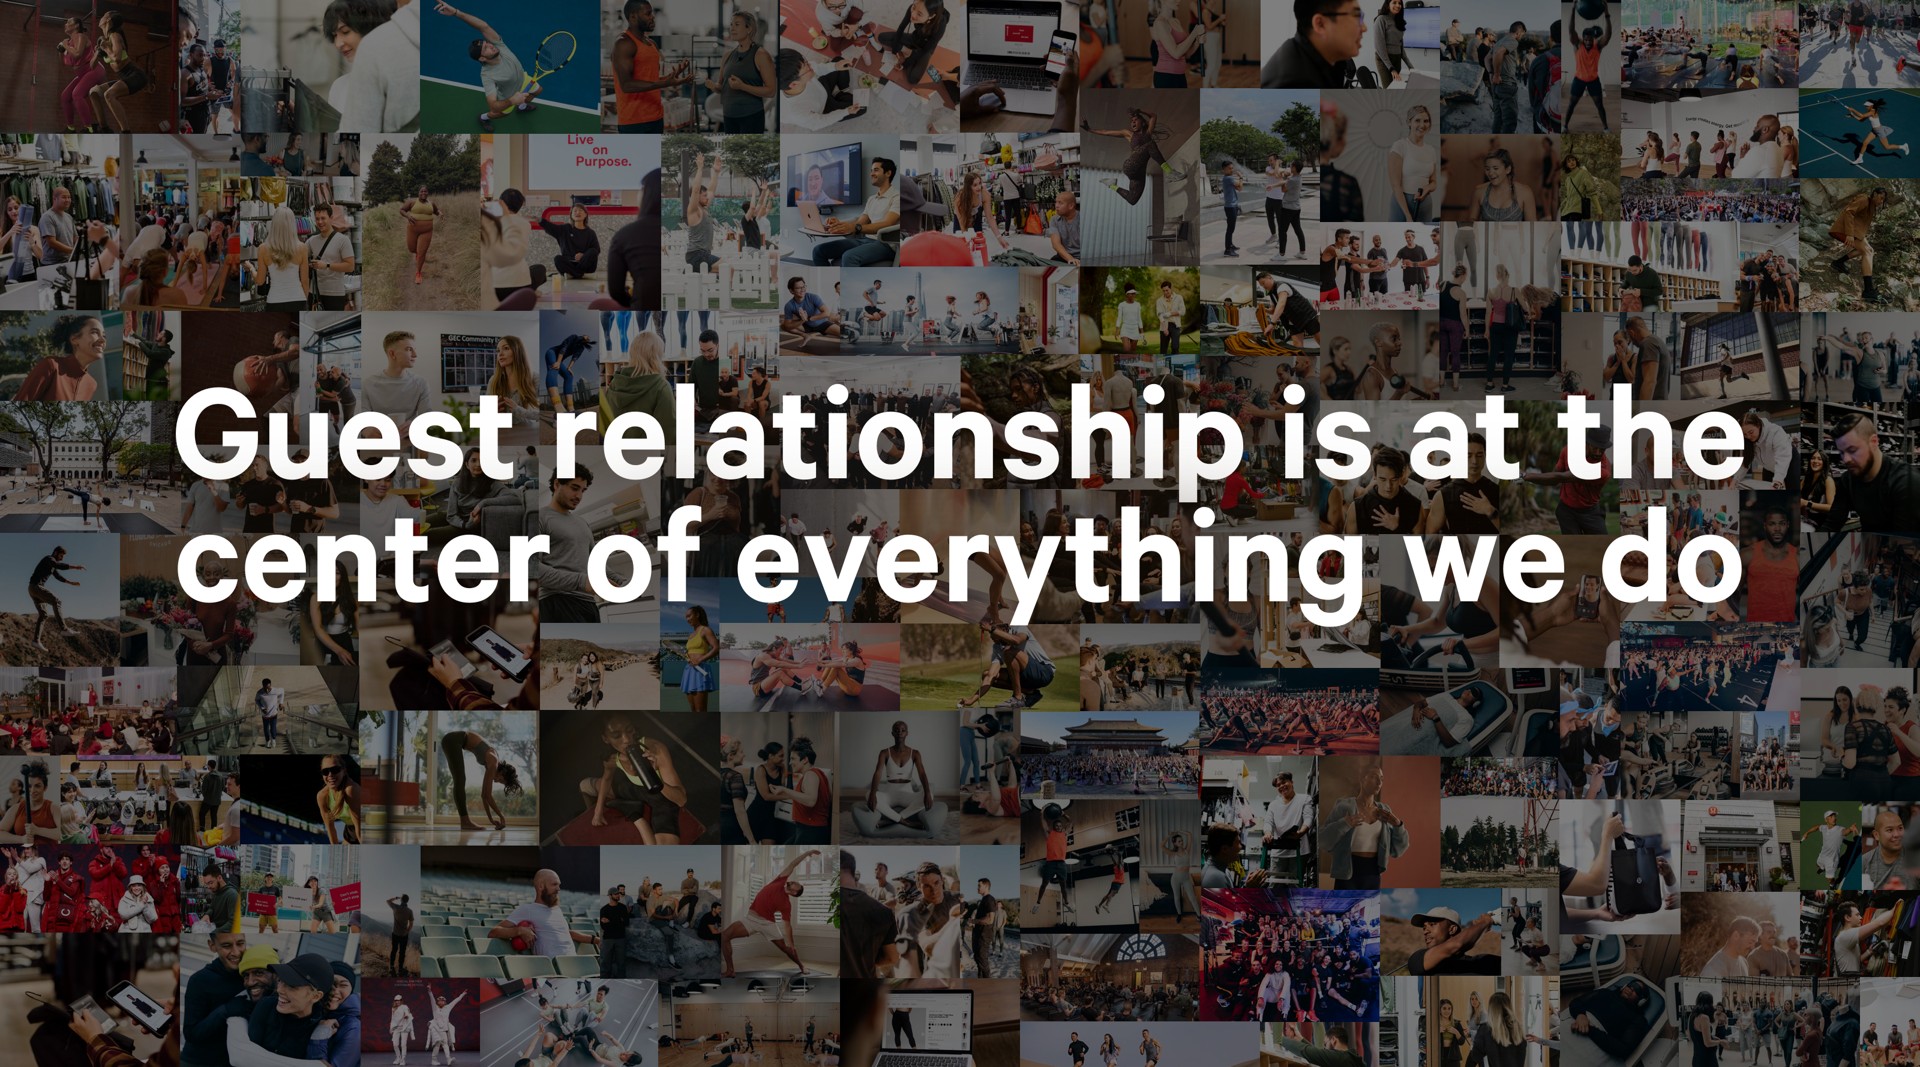 guest relationship is at the center of everything we do | Lululemon